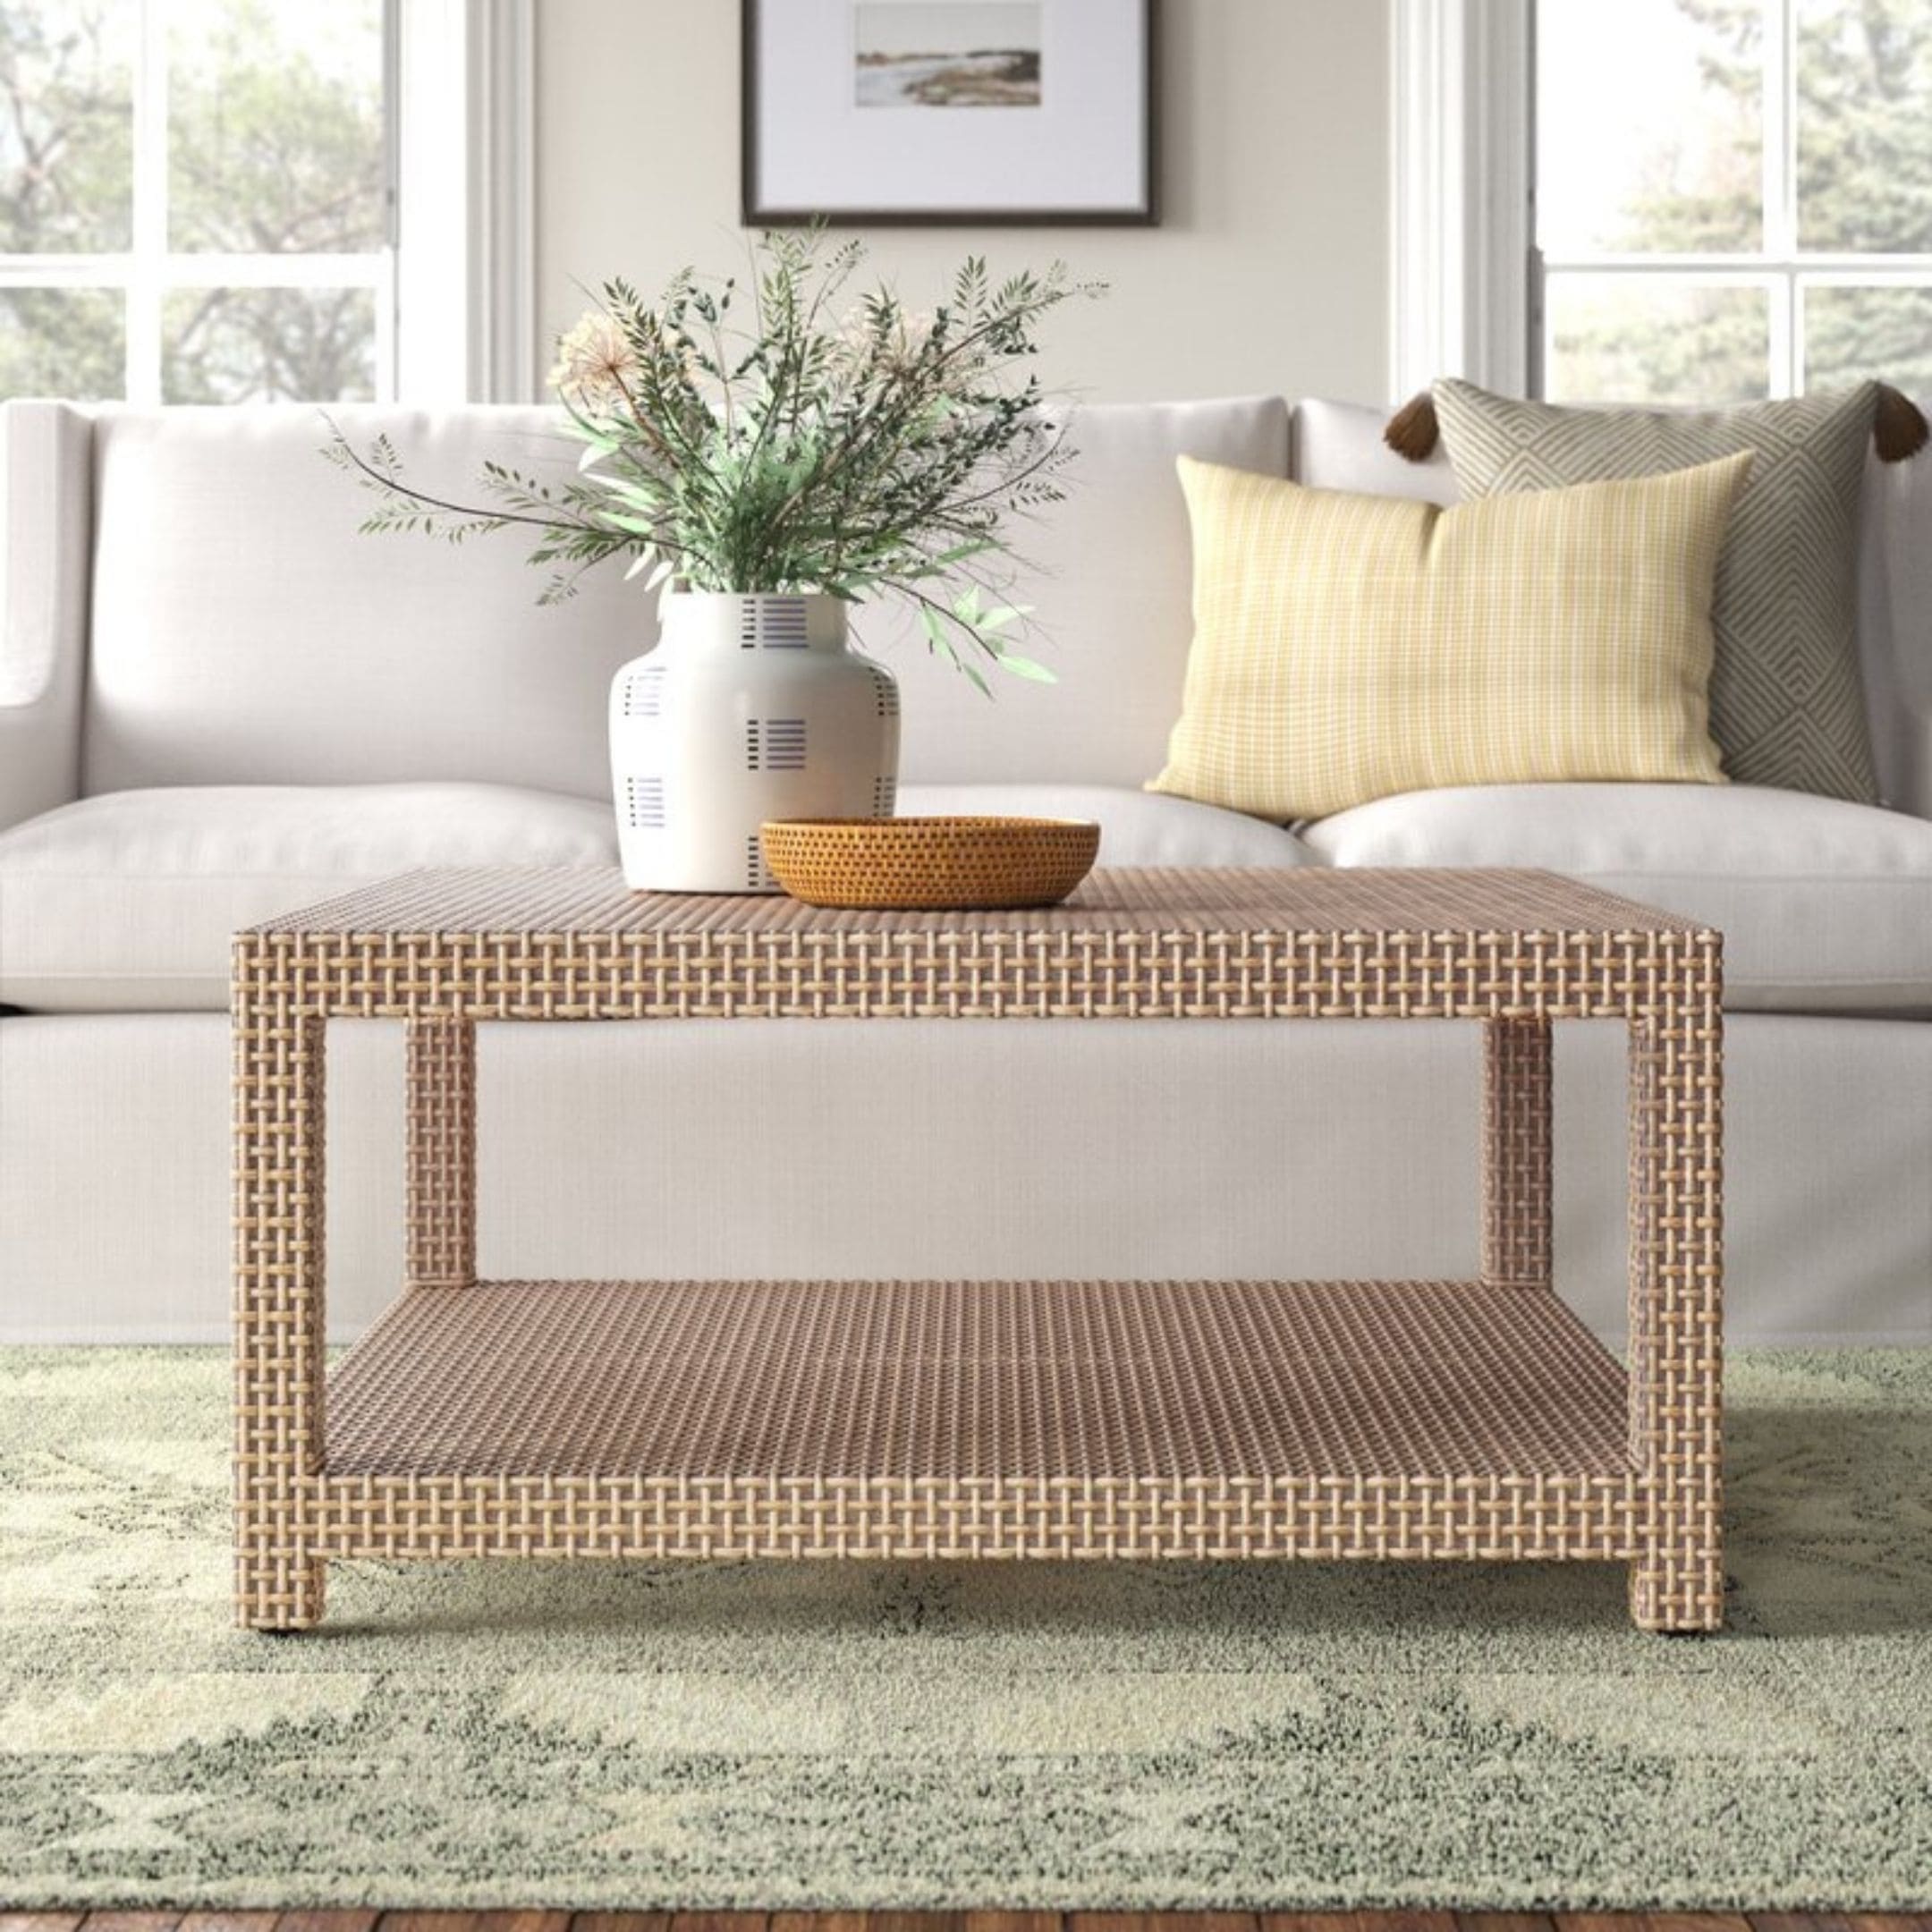 Square wicker coffee table with under storage.